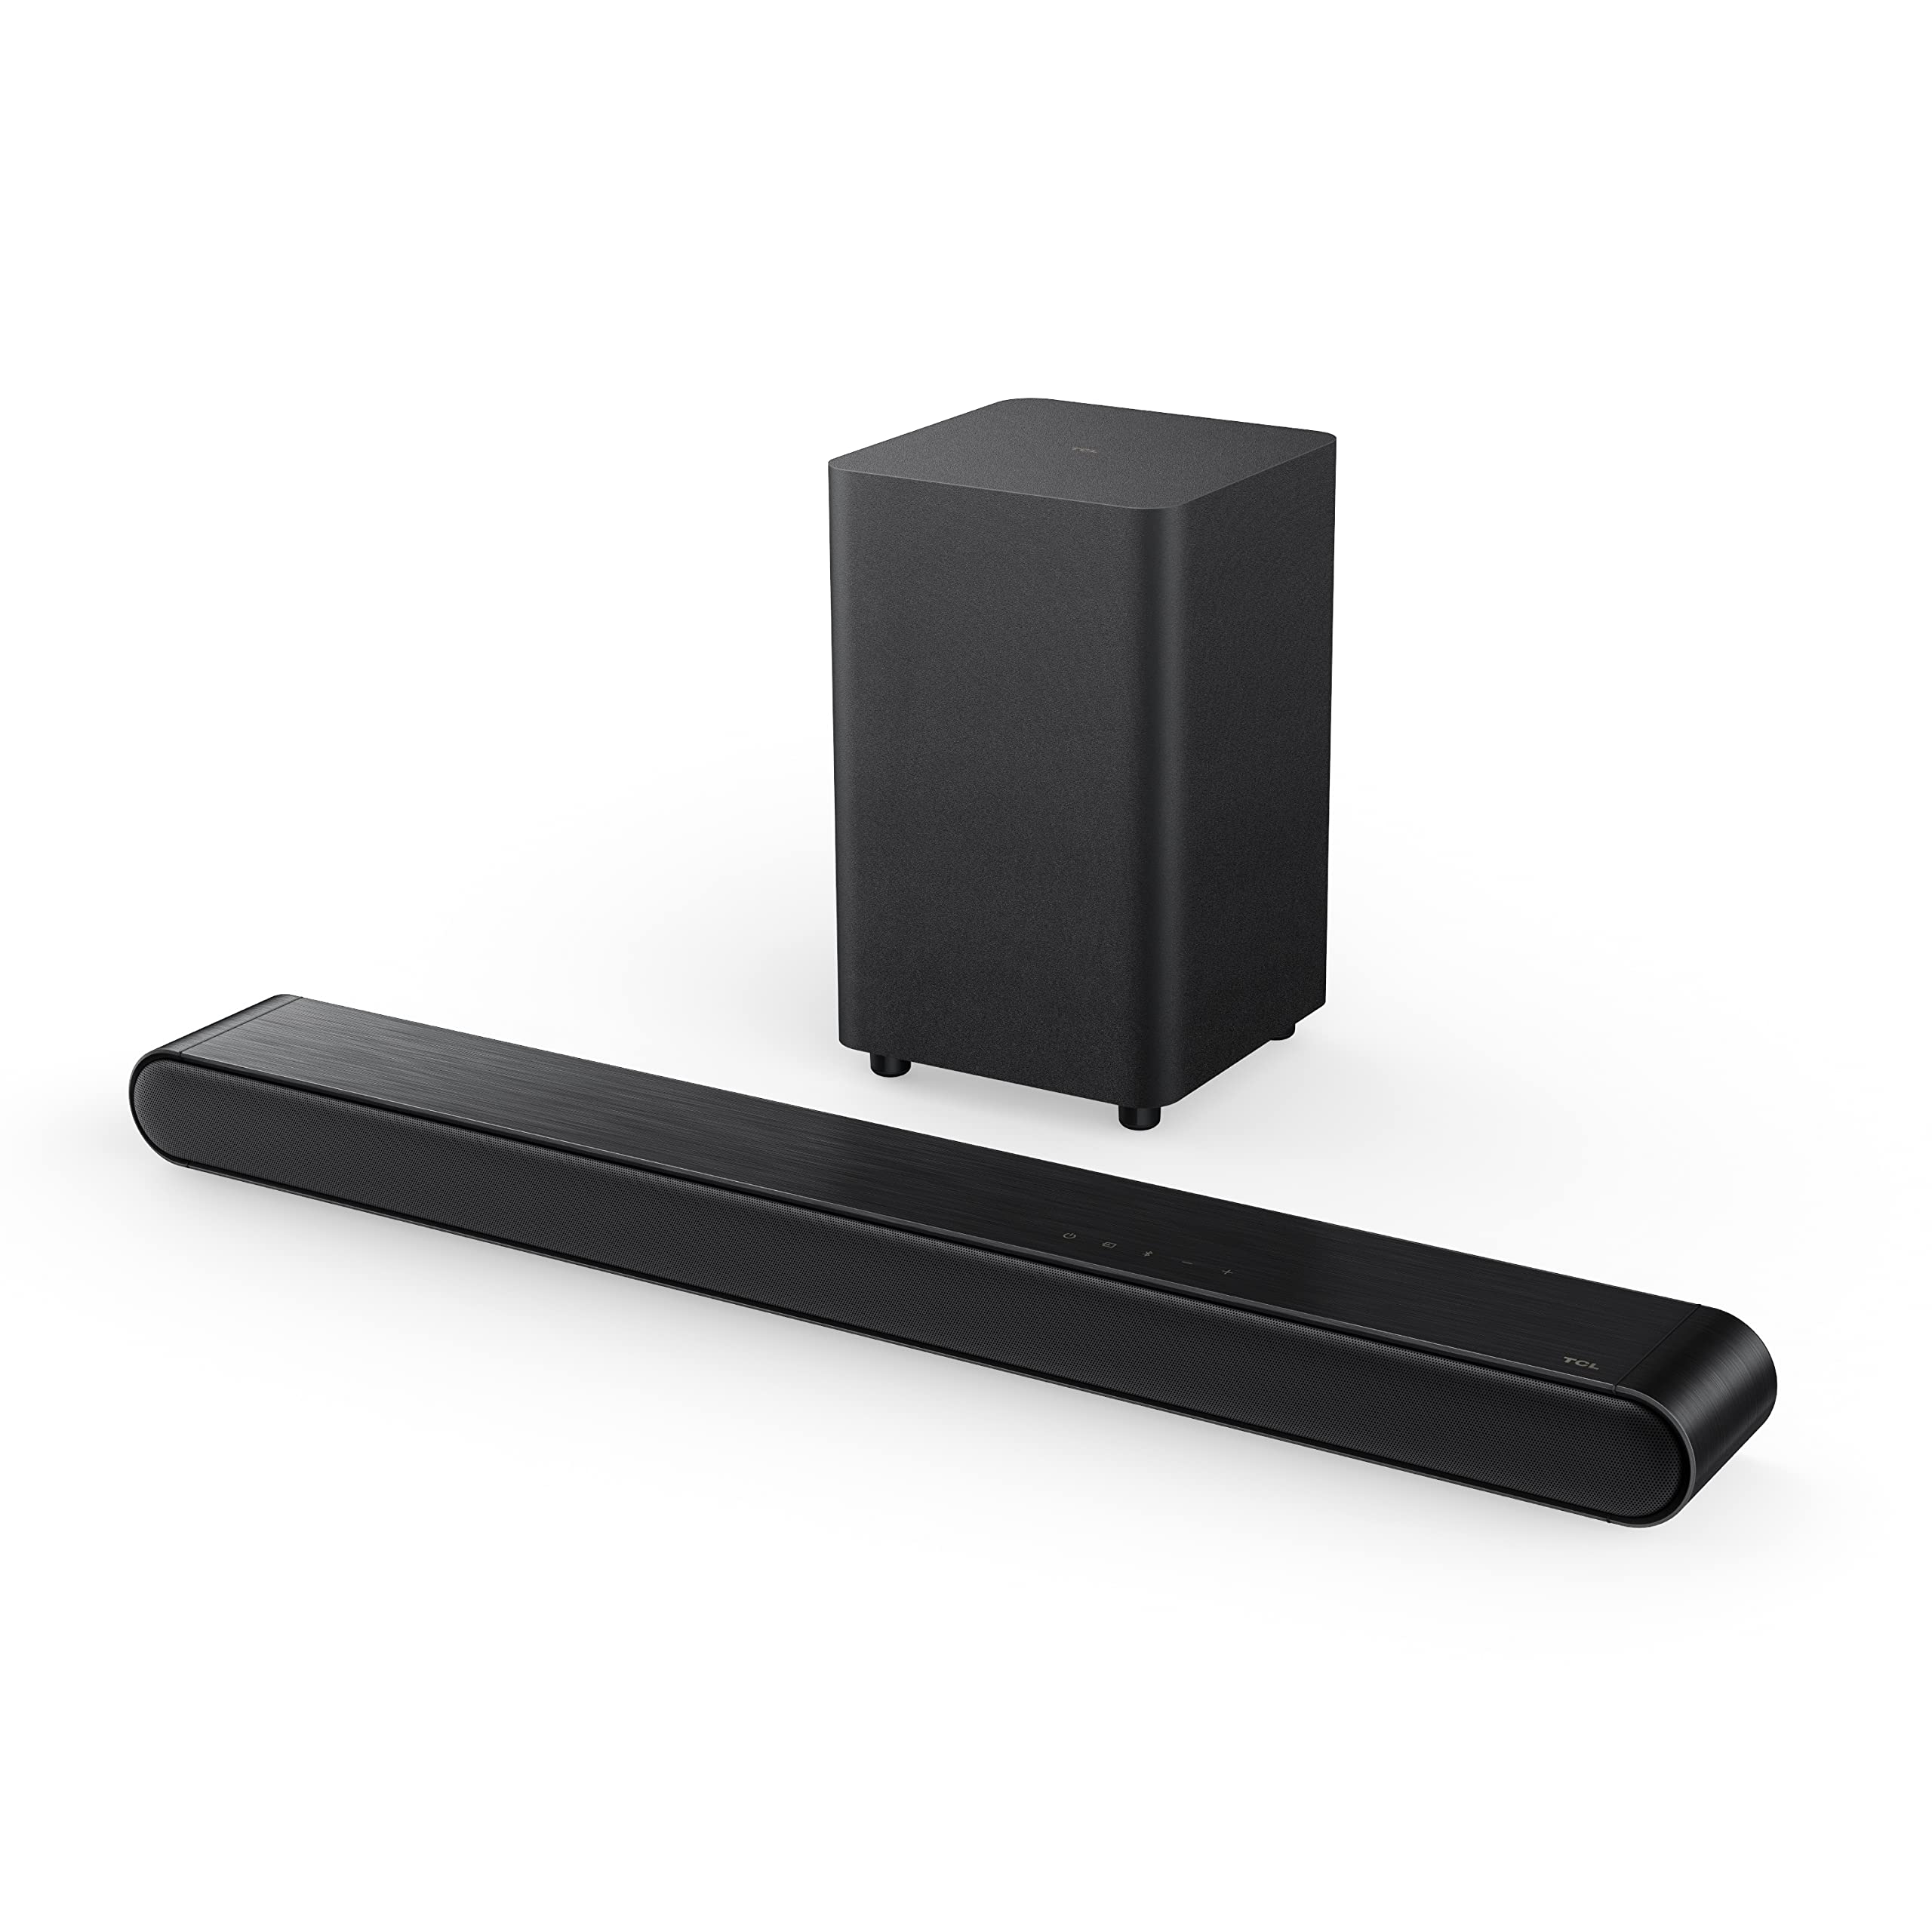 TCL 3.1ch Sound Bar with Wireless Subwoofer, (S4310, 2023 Model), Built-in Center Channel, Dolby Audio, DTS Virtual:X, Bluetooth, Wall Mount and HDMI Cable Included,Black